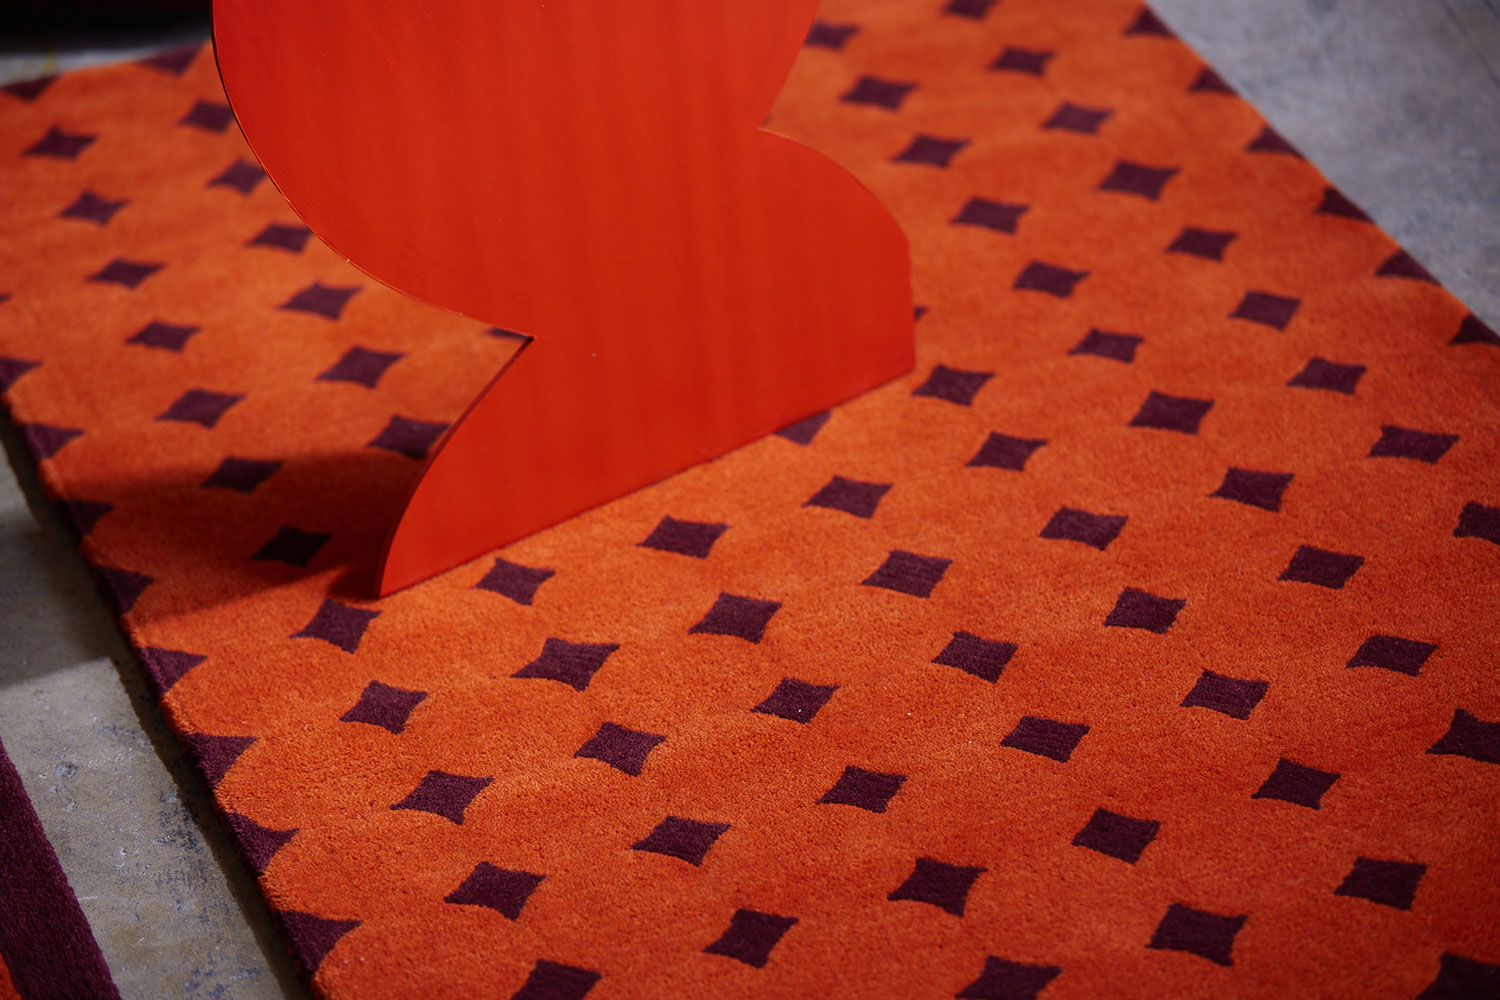 A close up of a cardboard red heart sits on top of a modern area rug in red called Bongo Passion